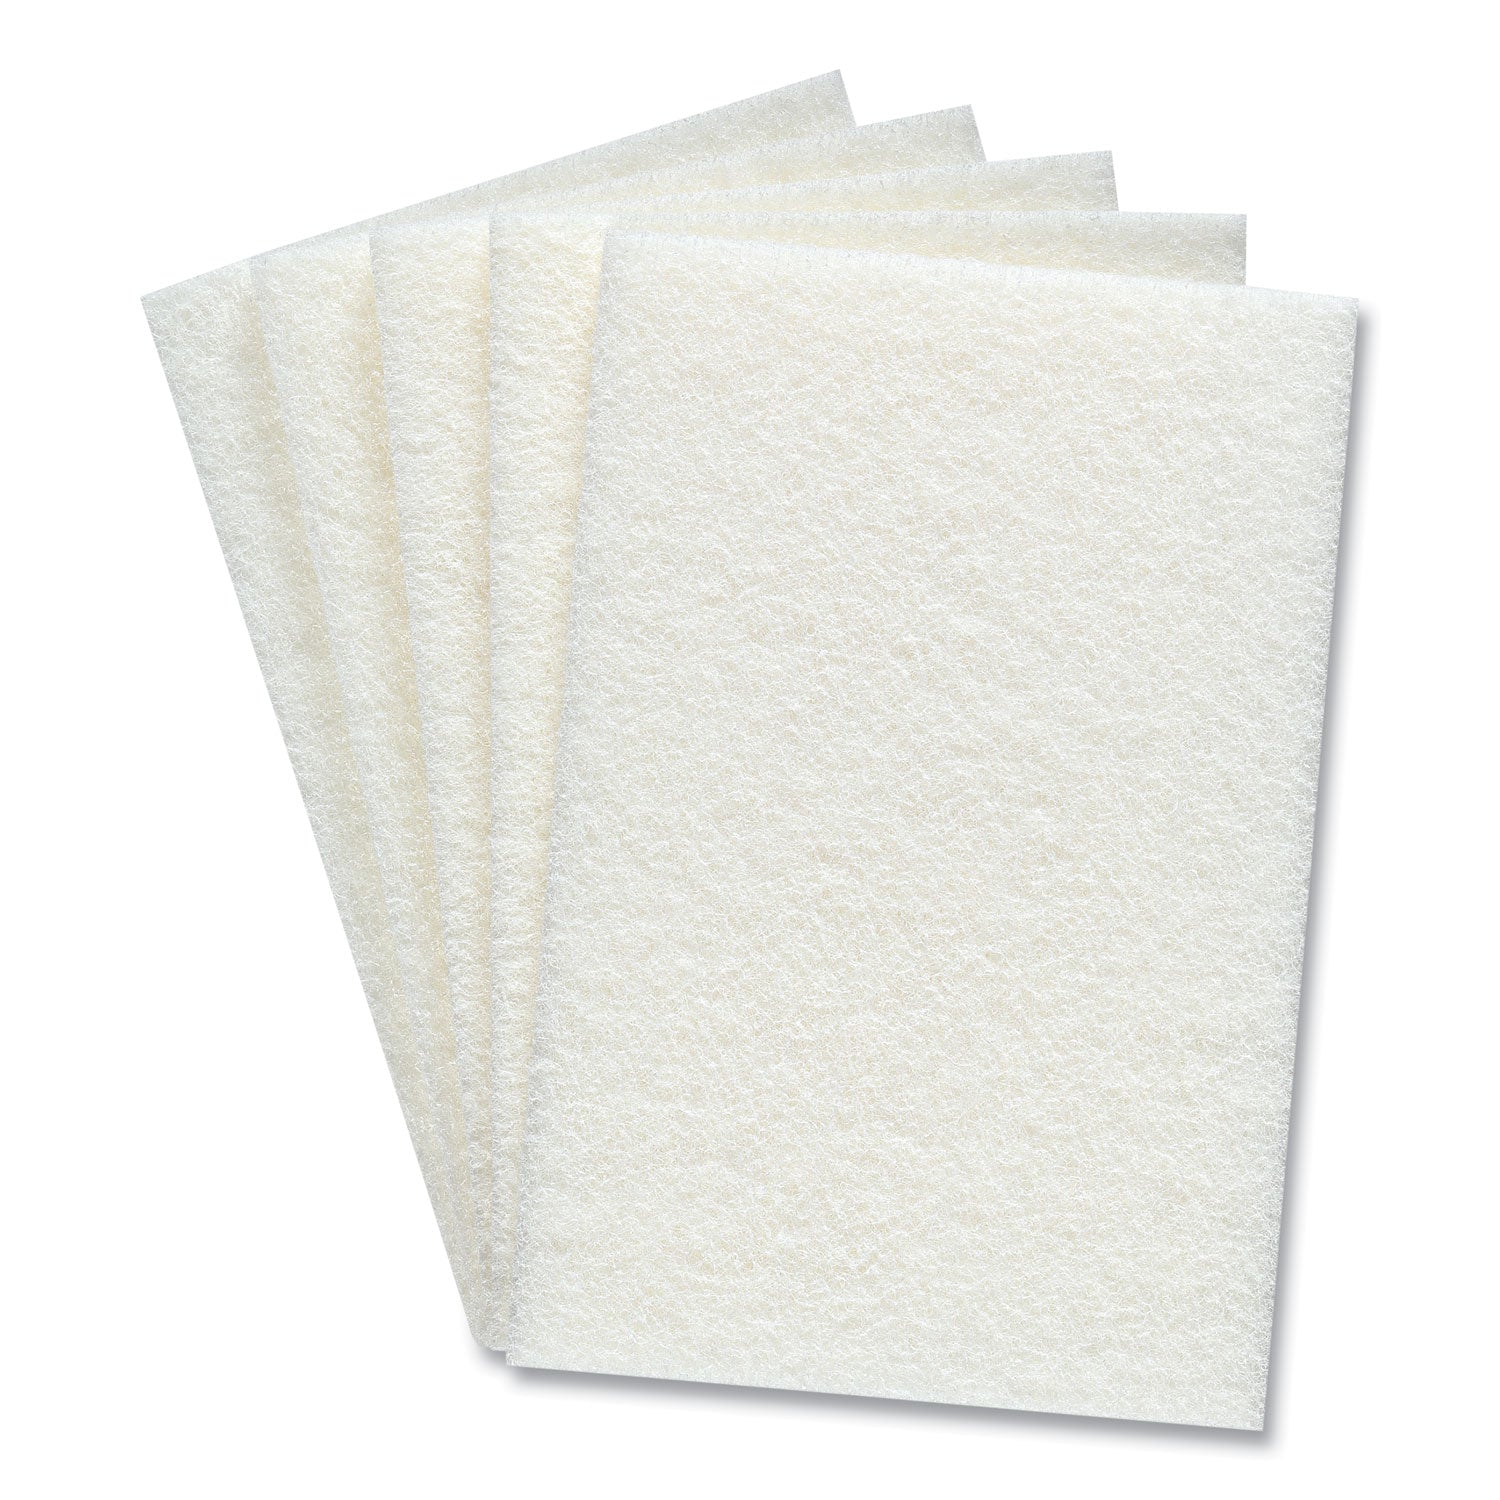 light-duty-scouring-pads-white-60-pack_cwz24418474 - 1